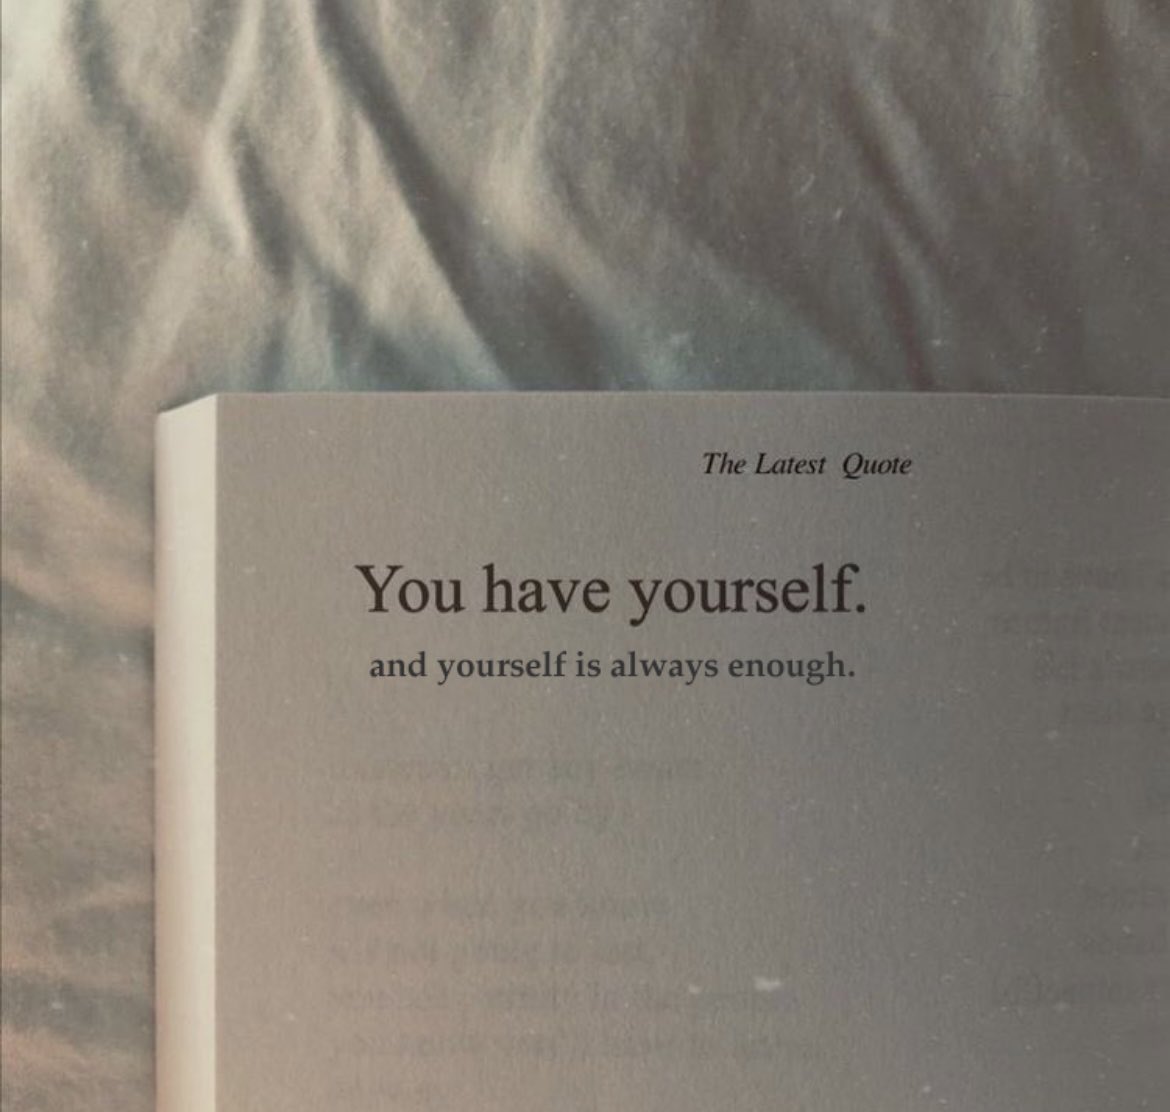 You are enough!

( From @wiseconnector )

#love #Loveyourself #youreenough